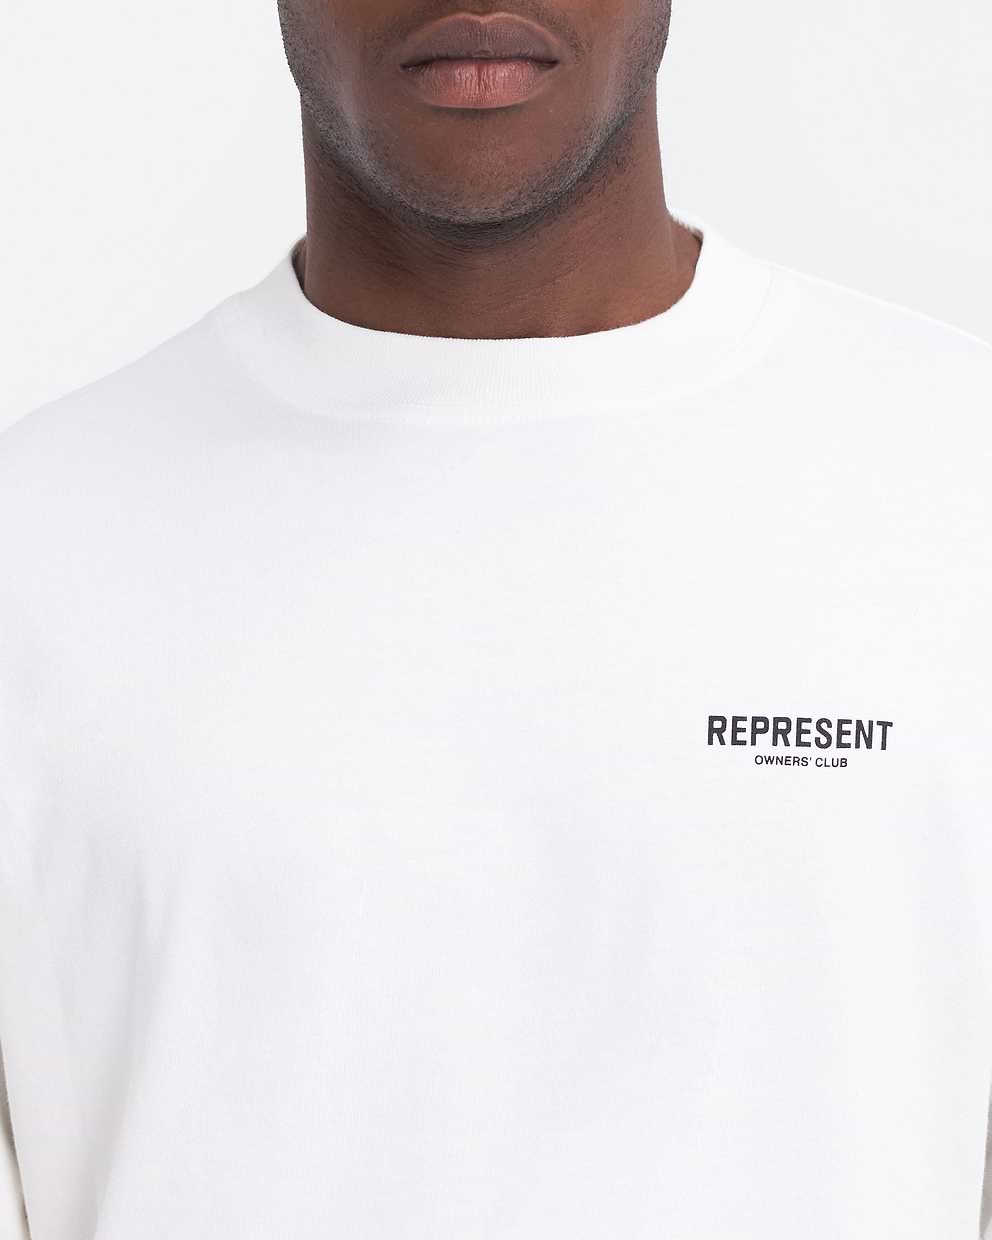 Represent Owners Club Long Sleeve T-Shirt - Flat White